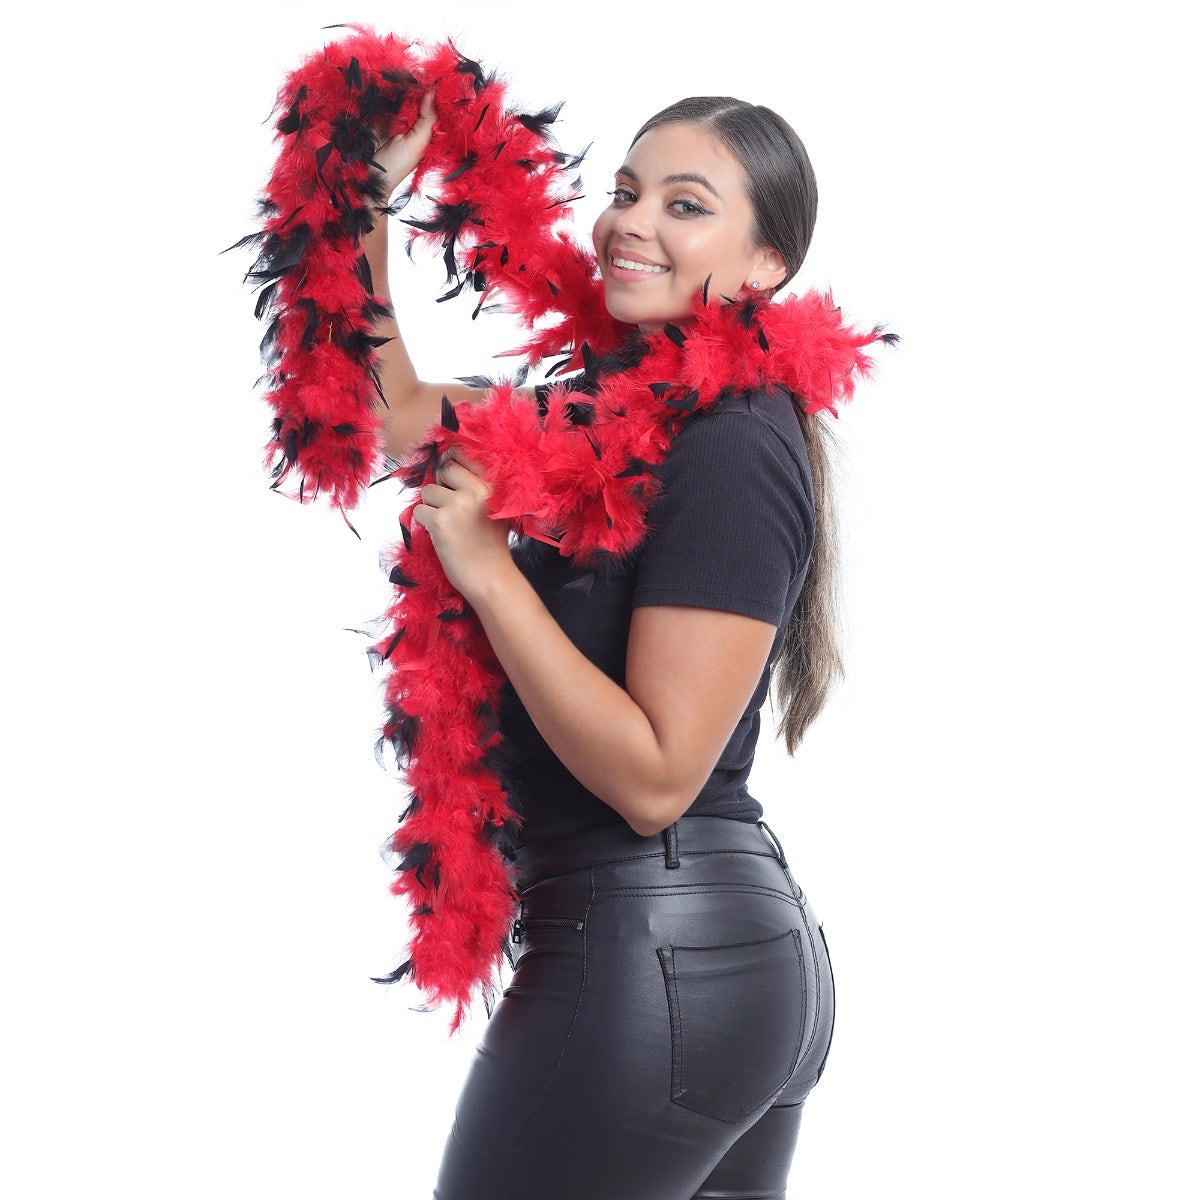 Chandelle Feather Boa - Medium Weight - Tipped- Red/Black